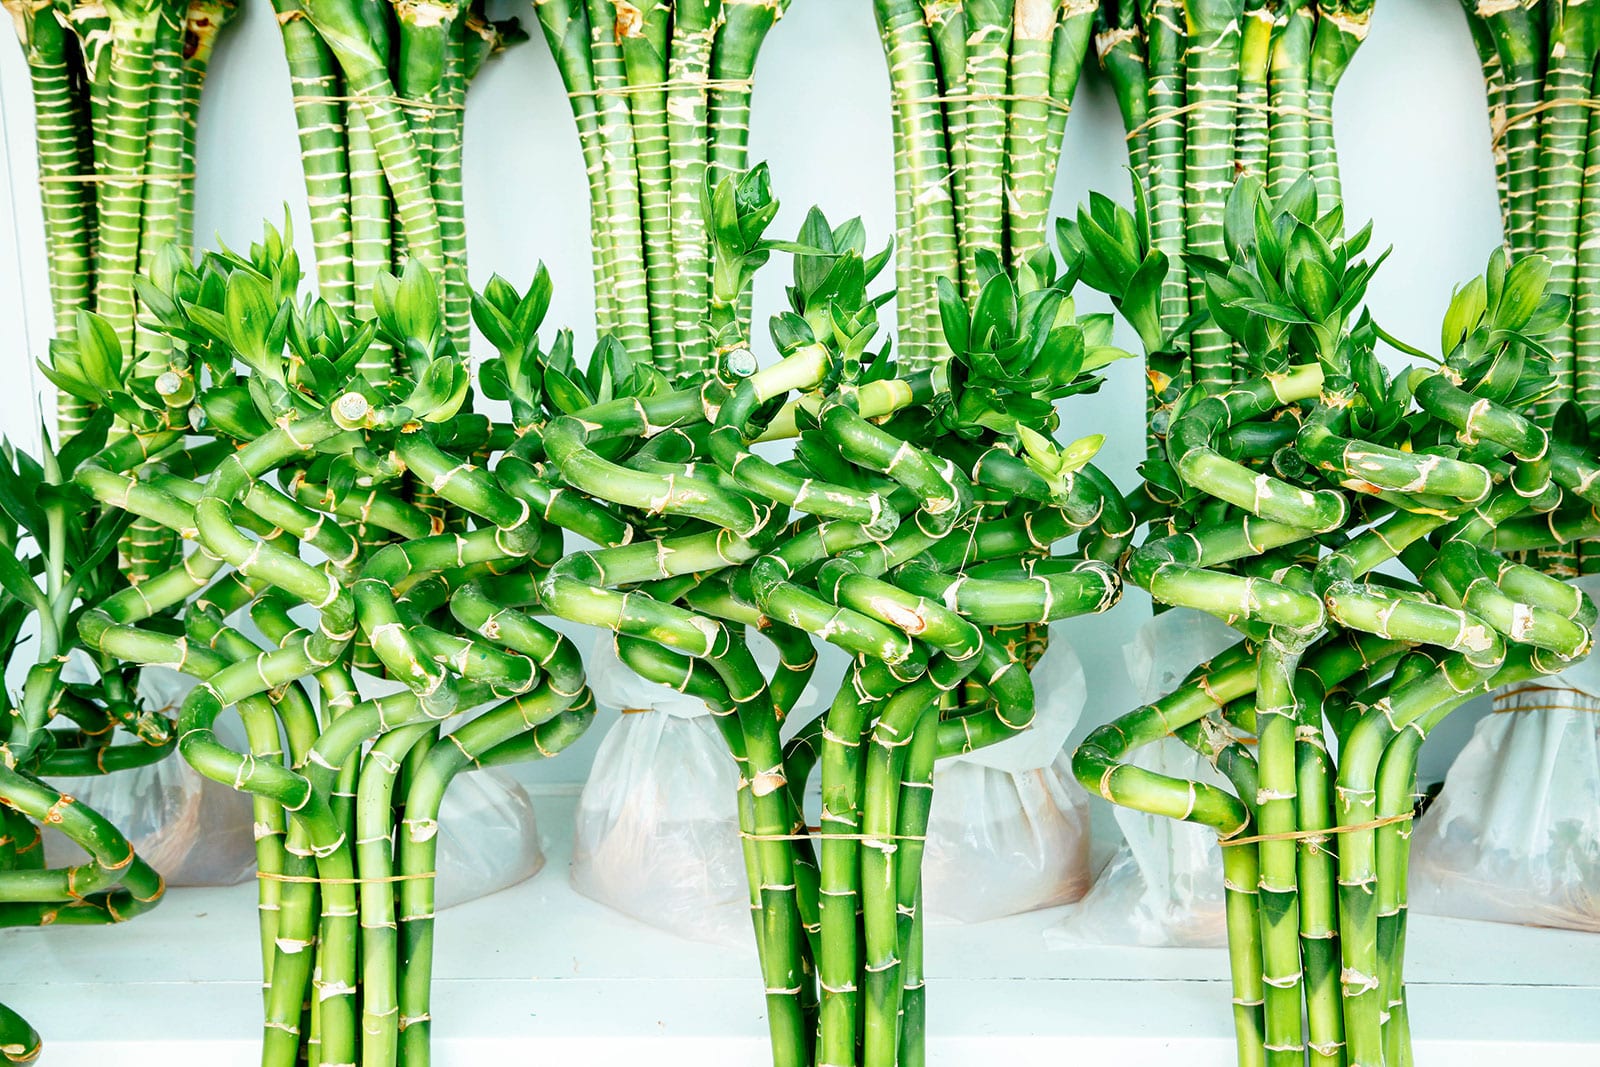 Clusters of curled lucky bamboo stems being sold in a market, with more lucky bamboo behind them in water-filled bags